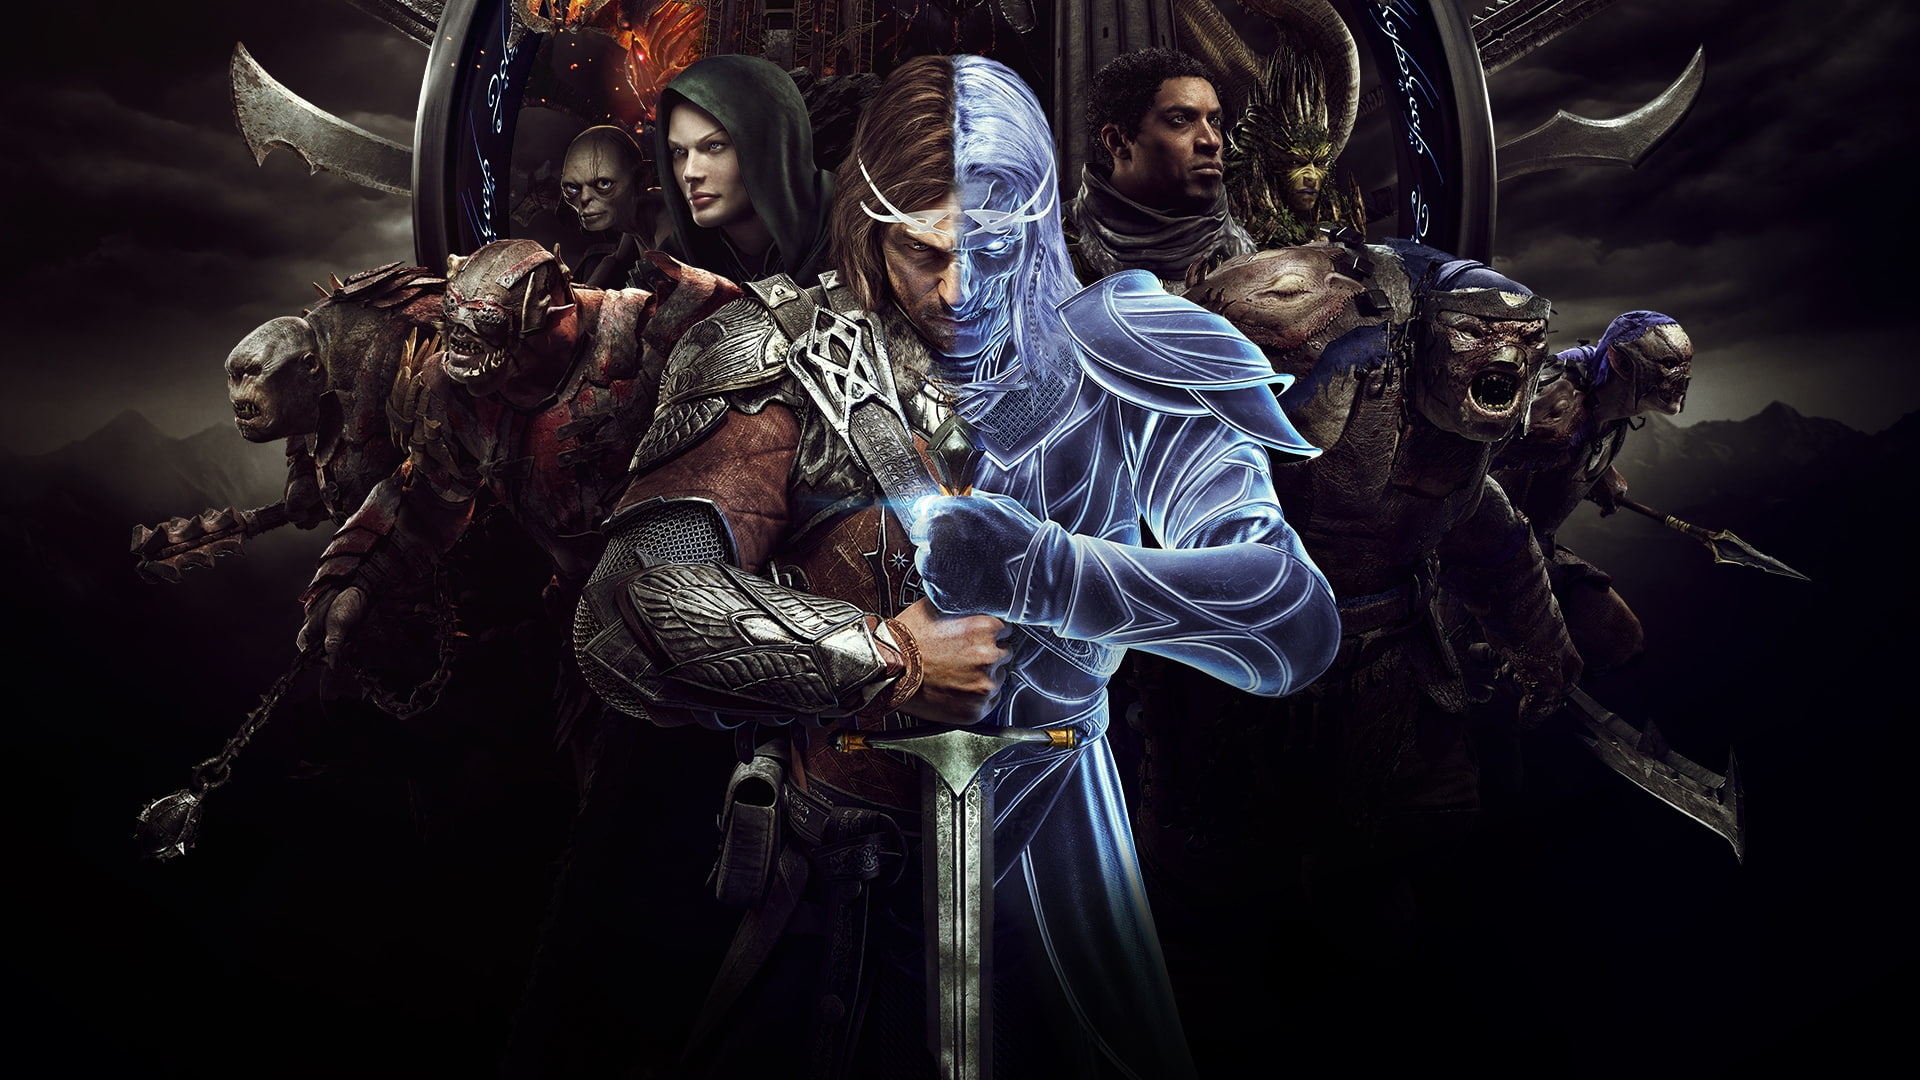 Middle-Earth Shadow of War, Talion, Celebrimbor, Orc, orcs